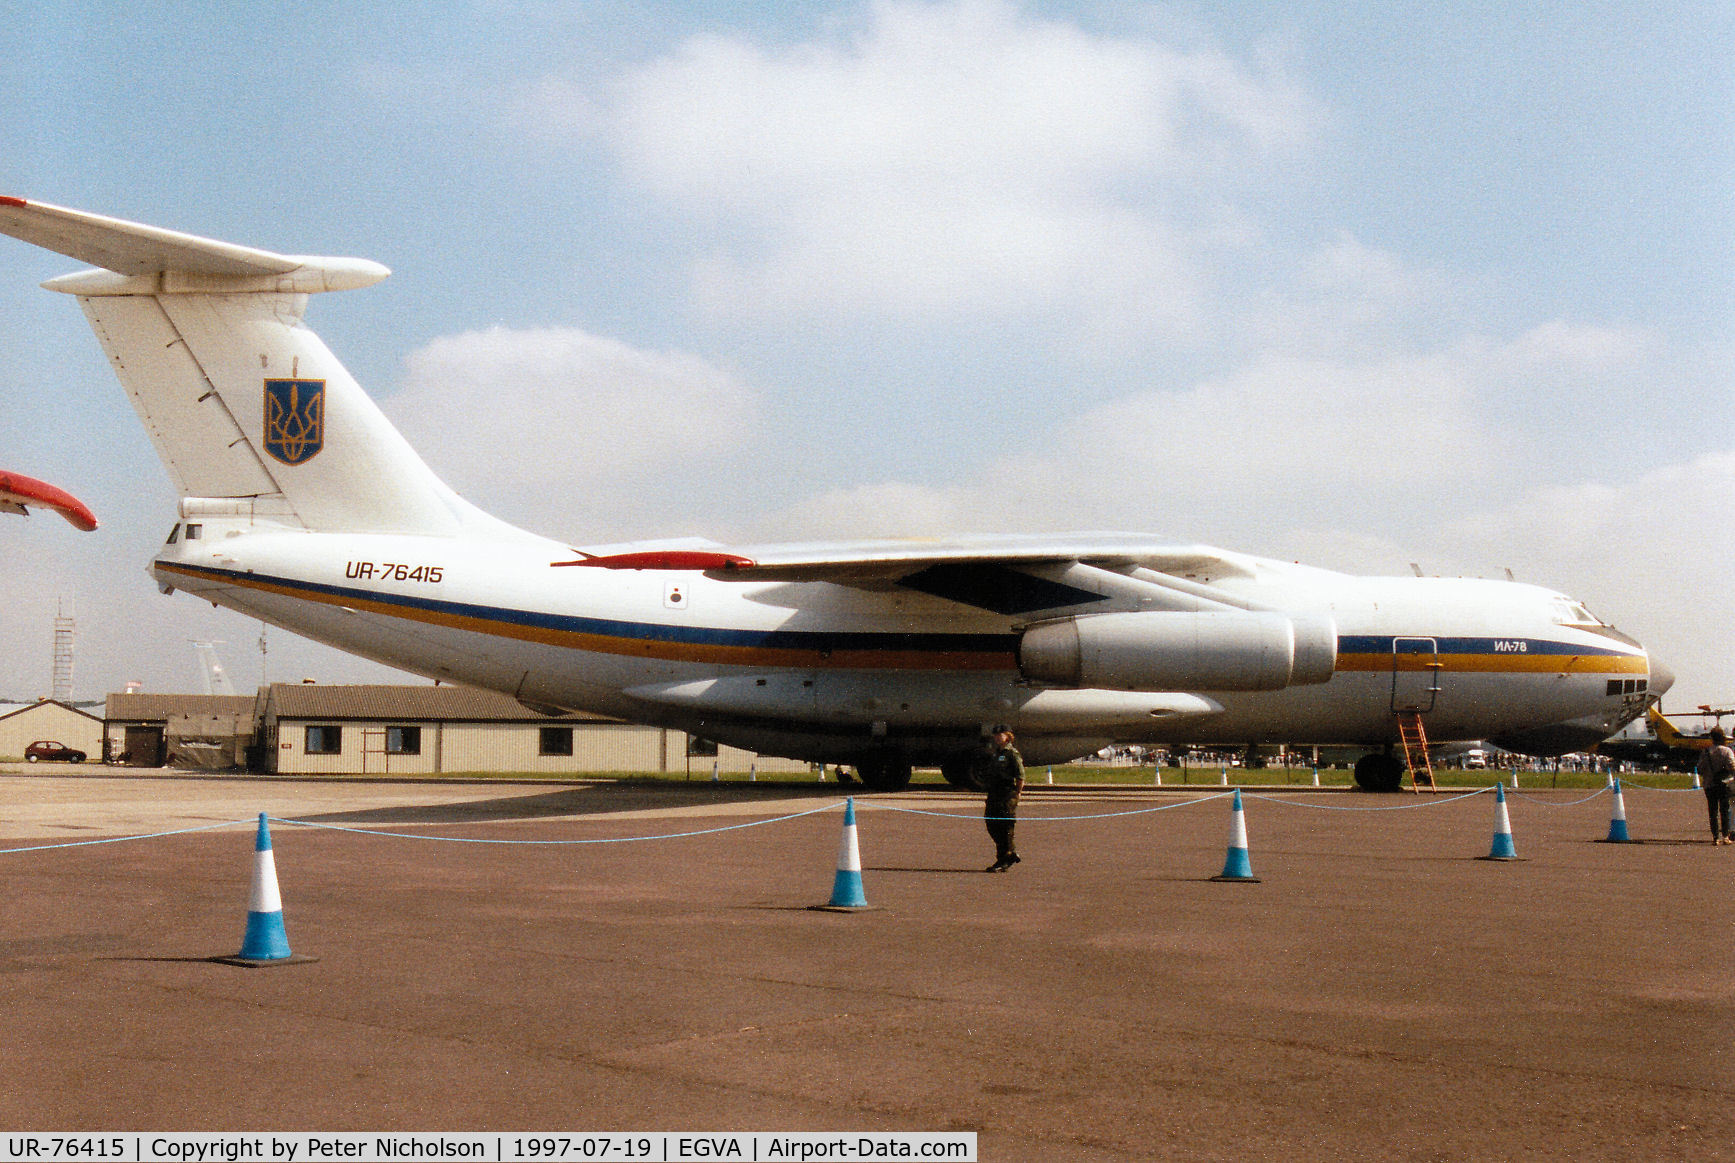 UR-76415, 1987 Ilyushin Il-76 C/N 0083481440, Another view of the Il-78 Midas from the Ukraine on display at the 1997 Intnl Air Tattoo at RAF Fairford.